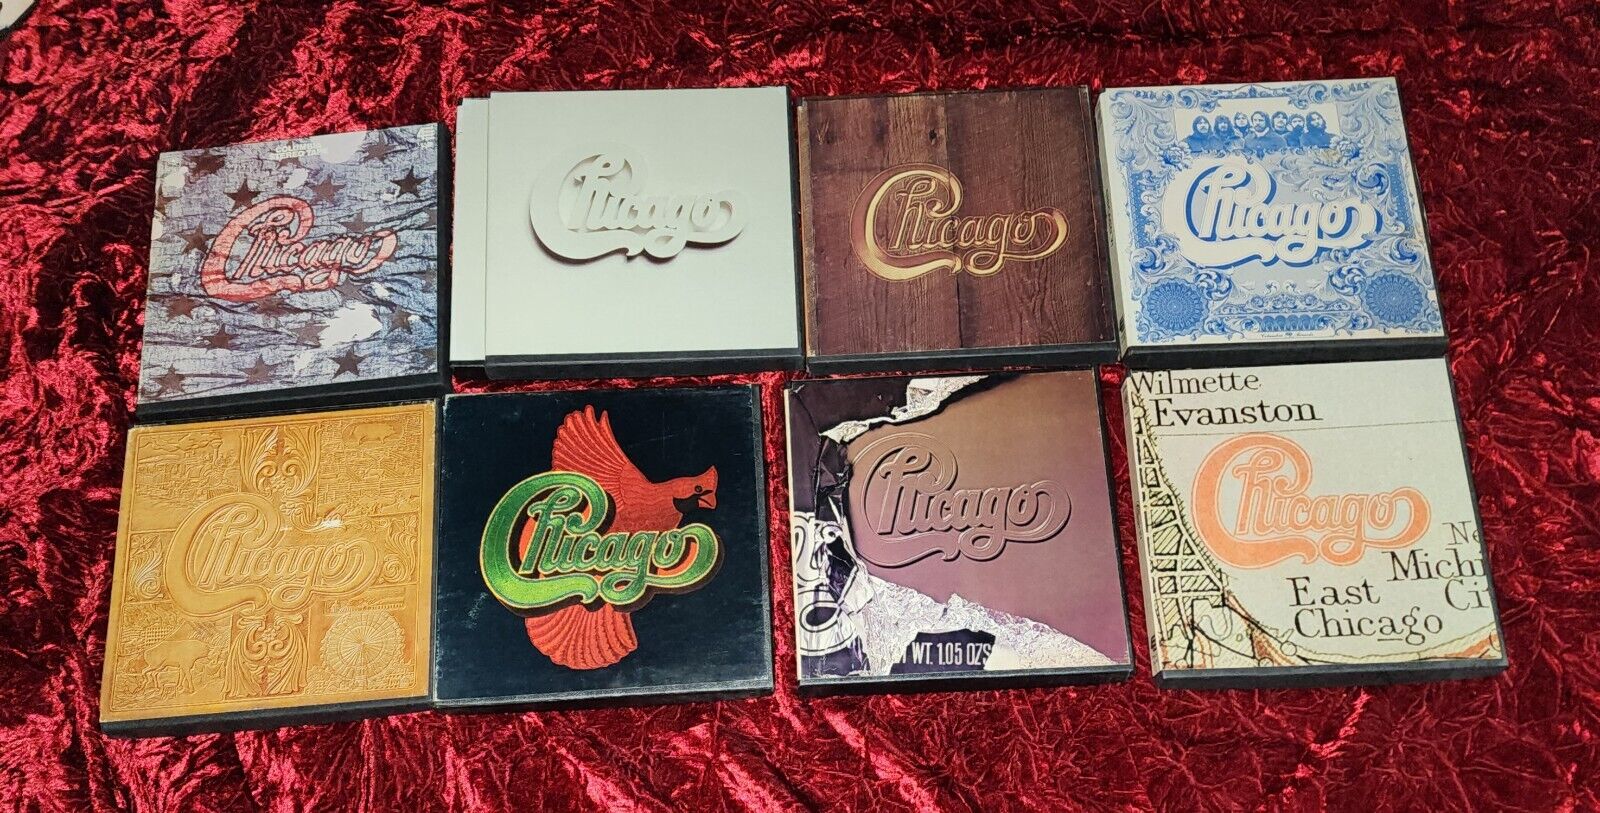 CHICAGO (The Band) - Reel to Reel Tapes  (8 titles - III - XI) - VERY GOOD +